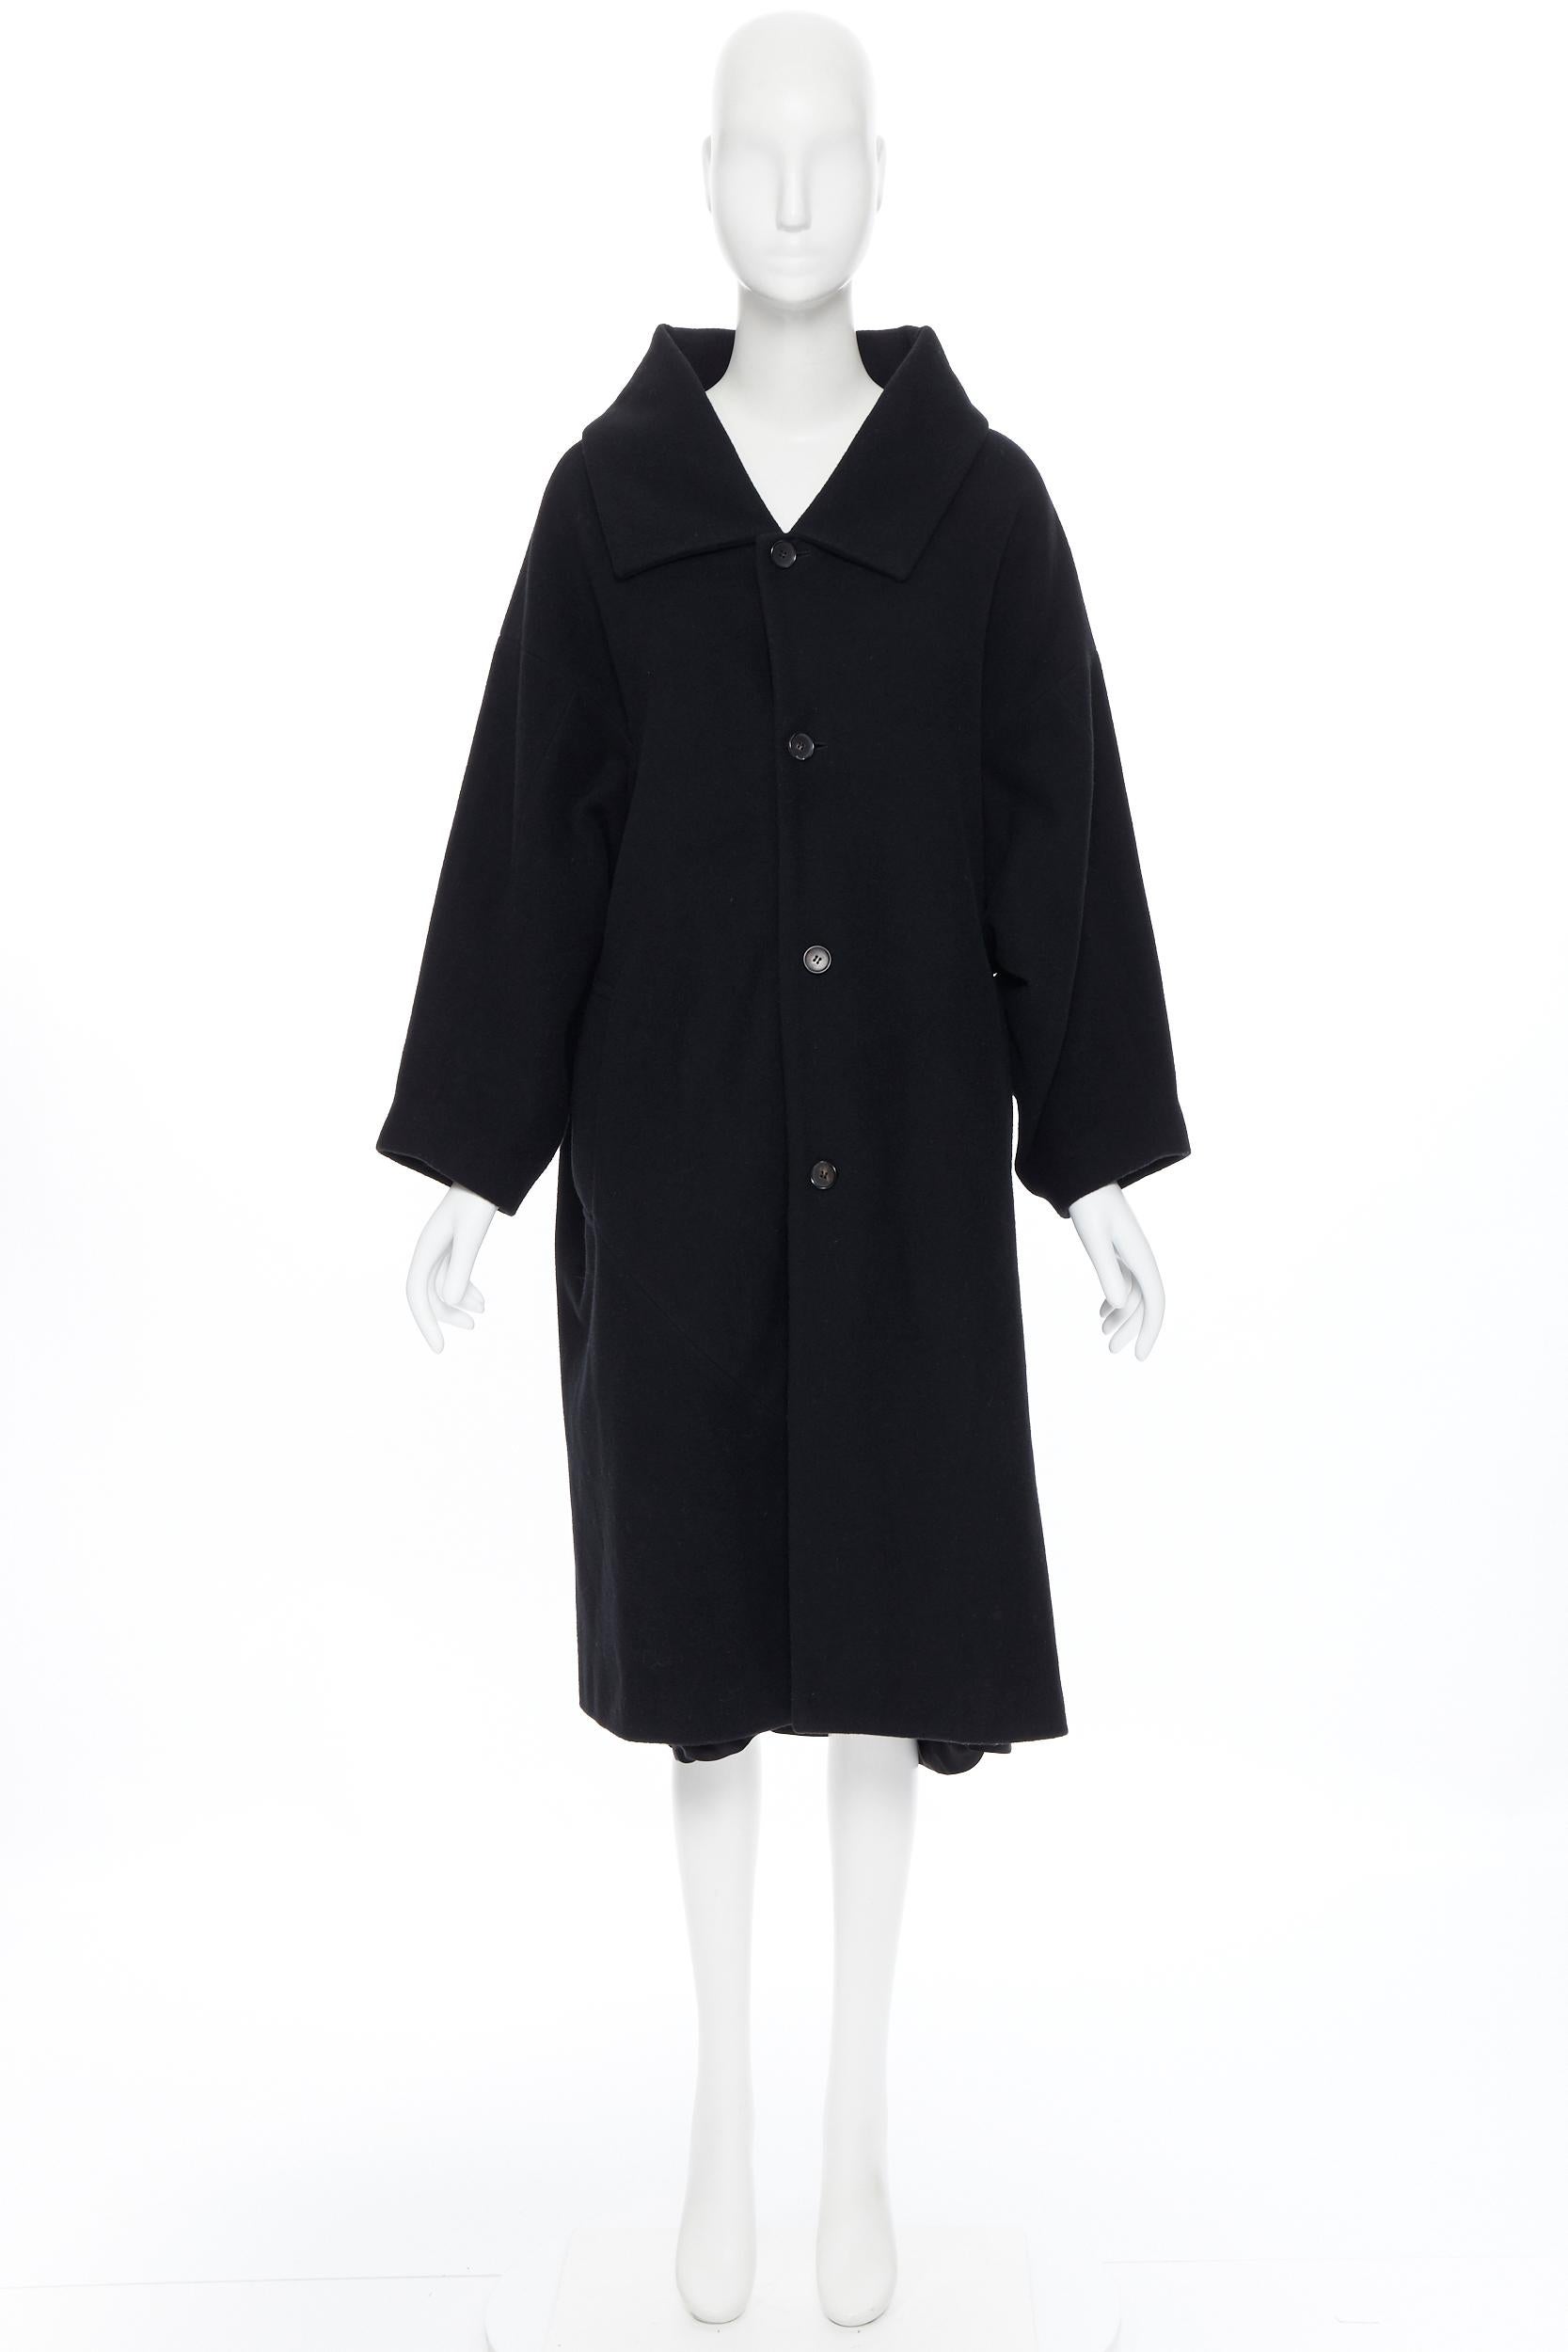 COMME DES GARCONS black wool blend kimono sleeve exposed lining winter coat S
Brand: Comme Des Garcons
Designer: Rei Kawakubo
Model Name / Style: Wool coat
Material: Wool blend
Color: Black
Pattern: Solid
Closure: Button
Extra Detail: Oversized cut.